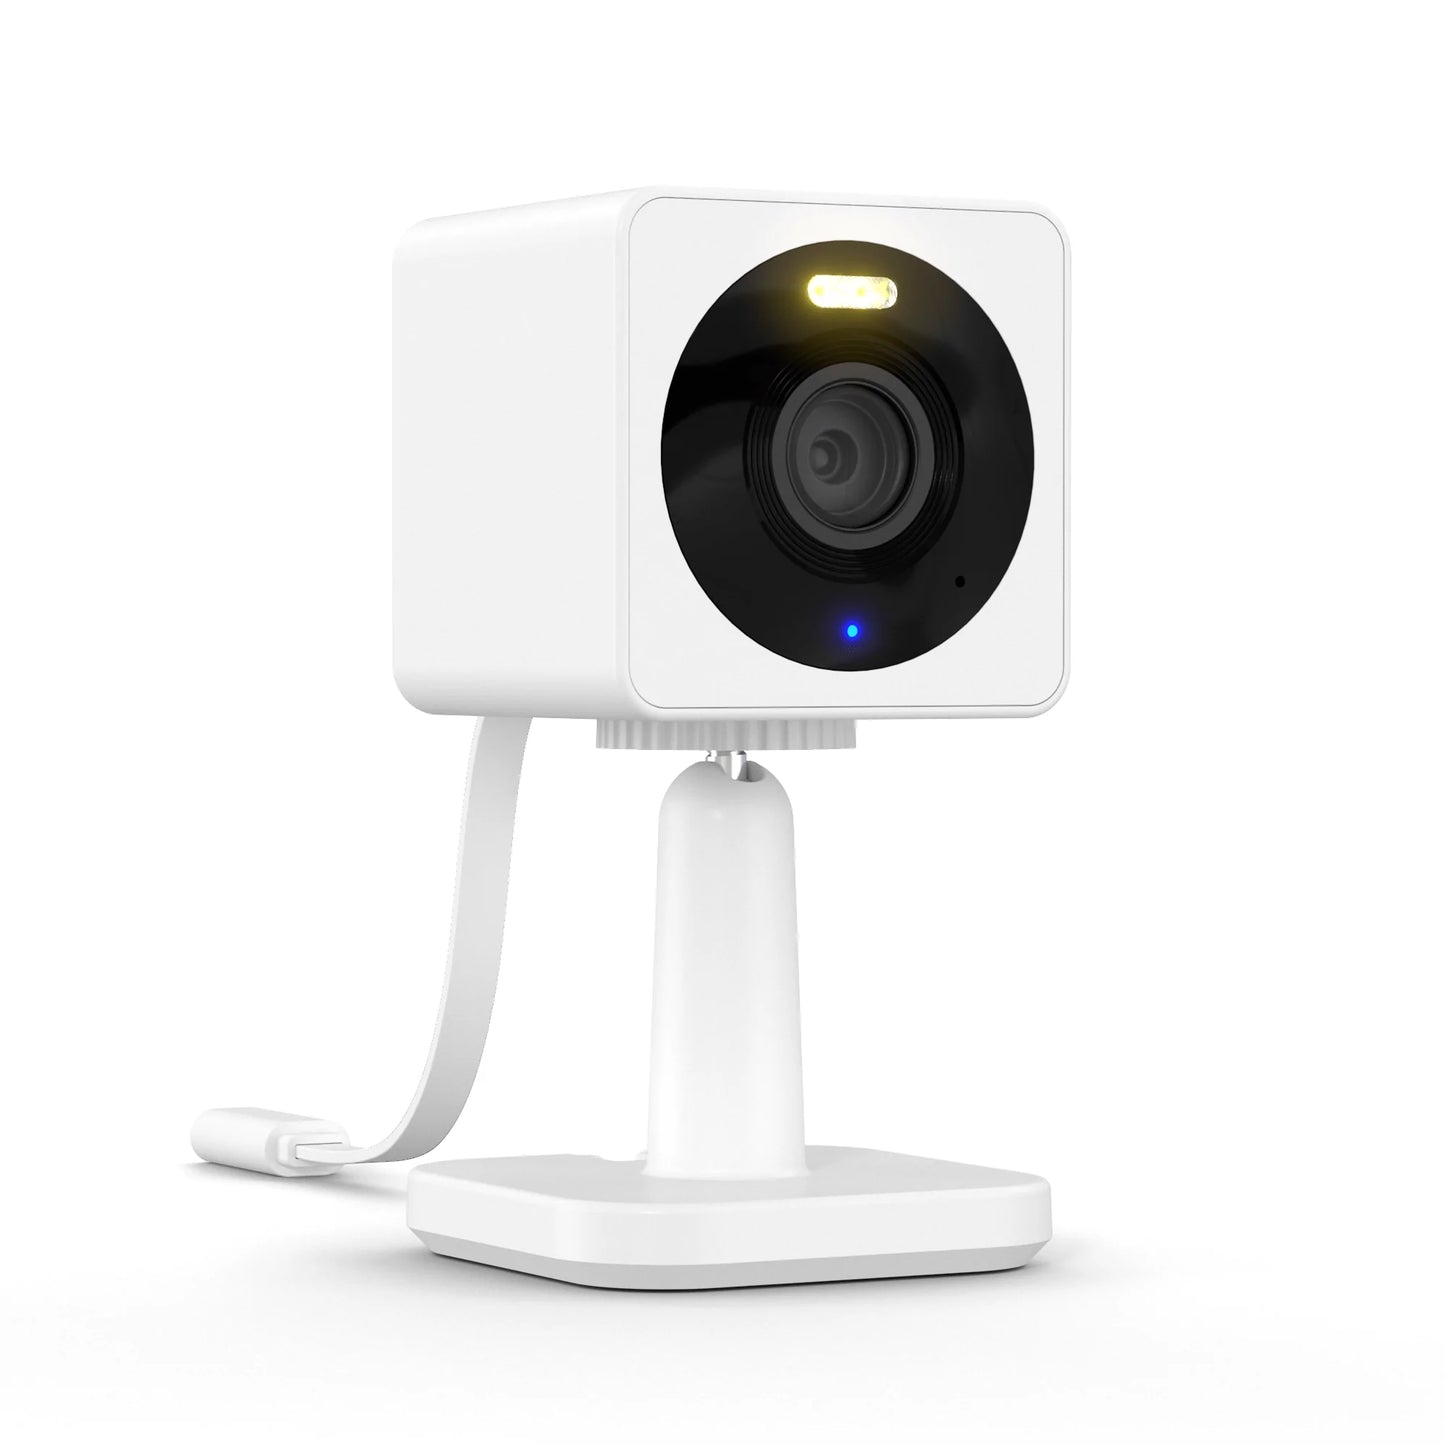 Product image of Wyze Cam OG standard against a white background.